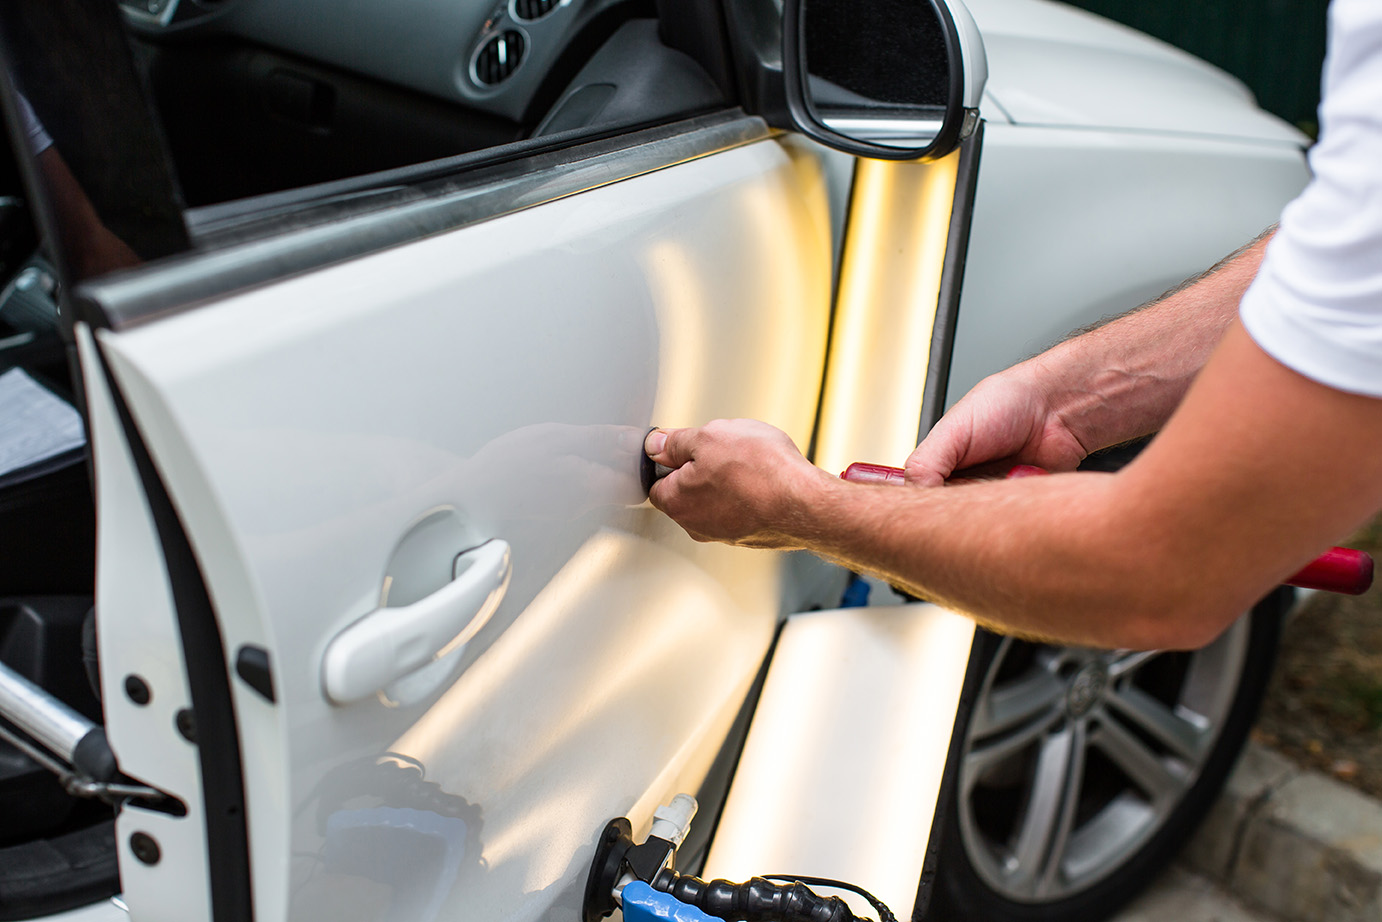 A mechanic shining lights on a white car door to see and repair the dents using PDR.